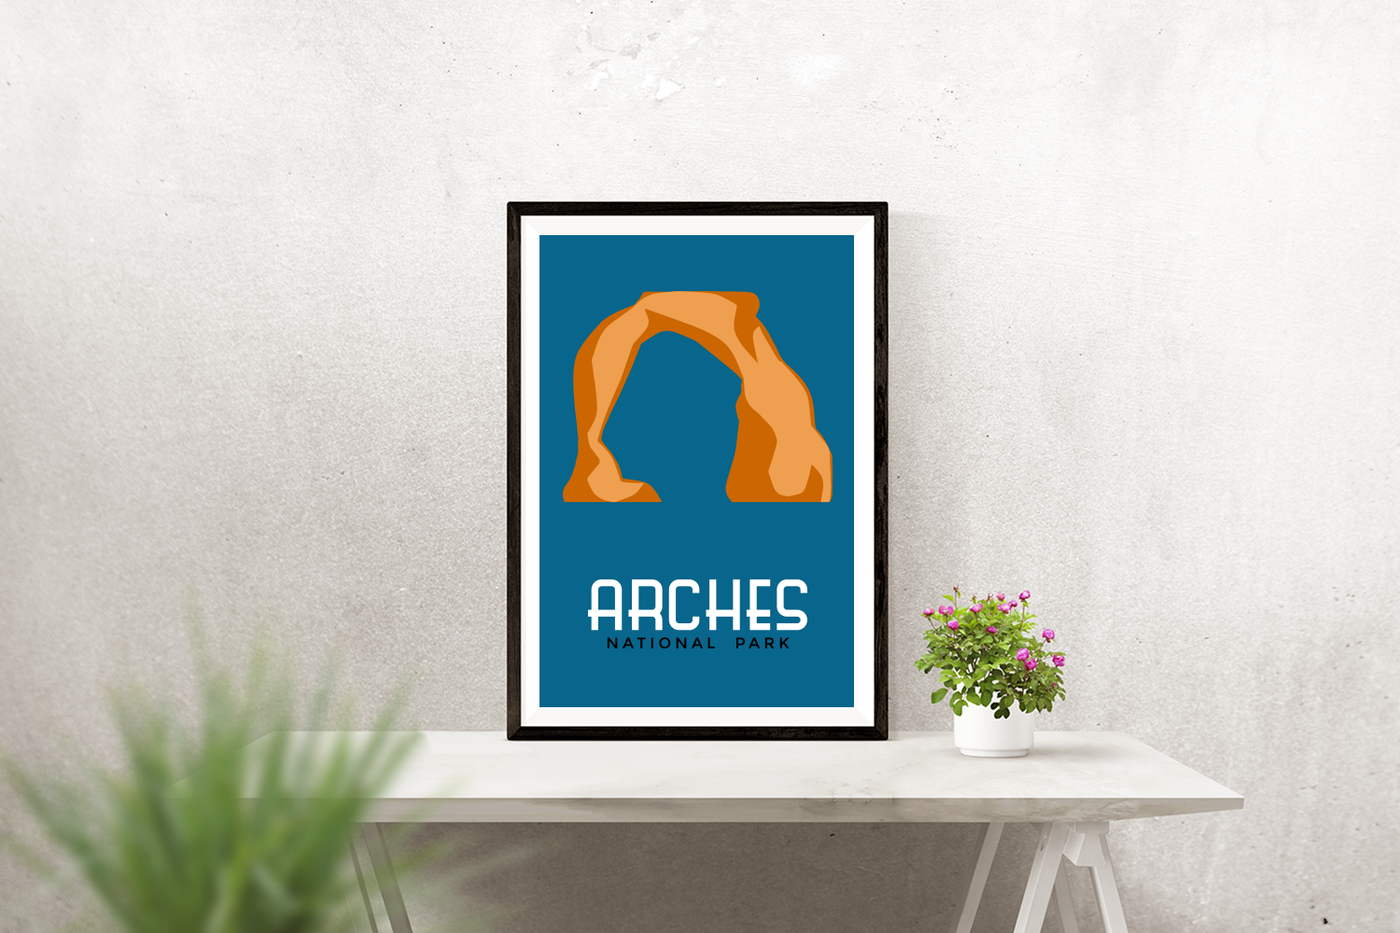 A framed poster on a table. The background is blue and in the center is the Arches rock formation. Below it says "Arches national park."